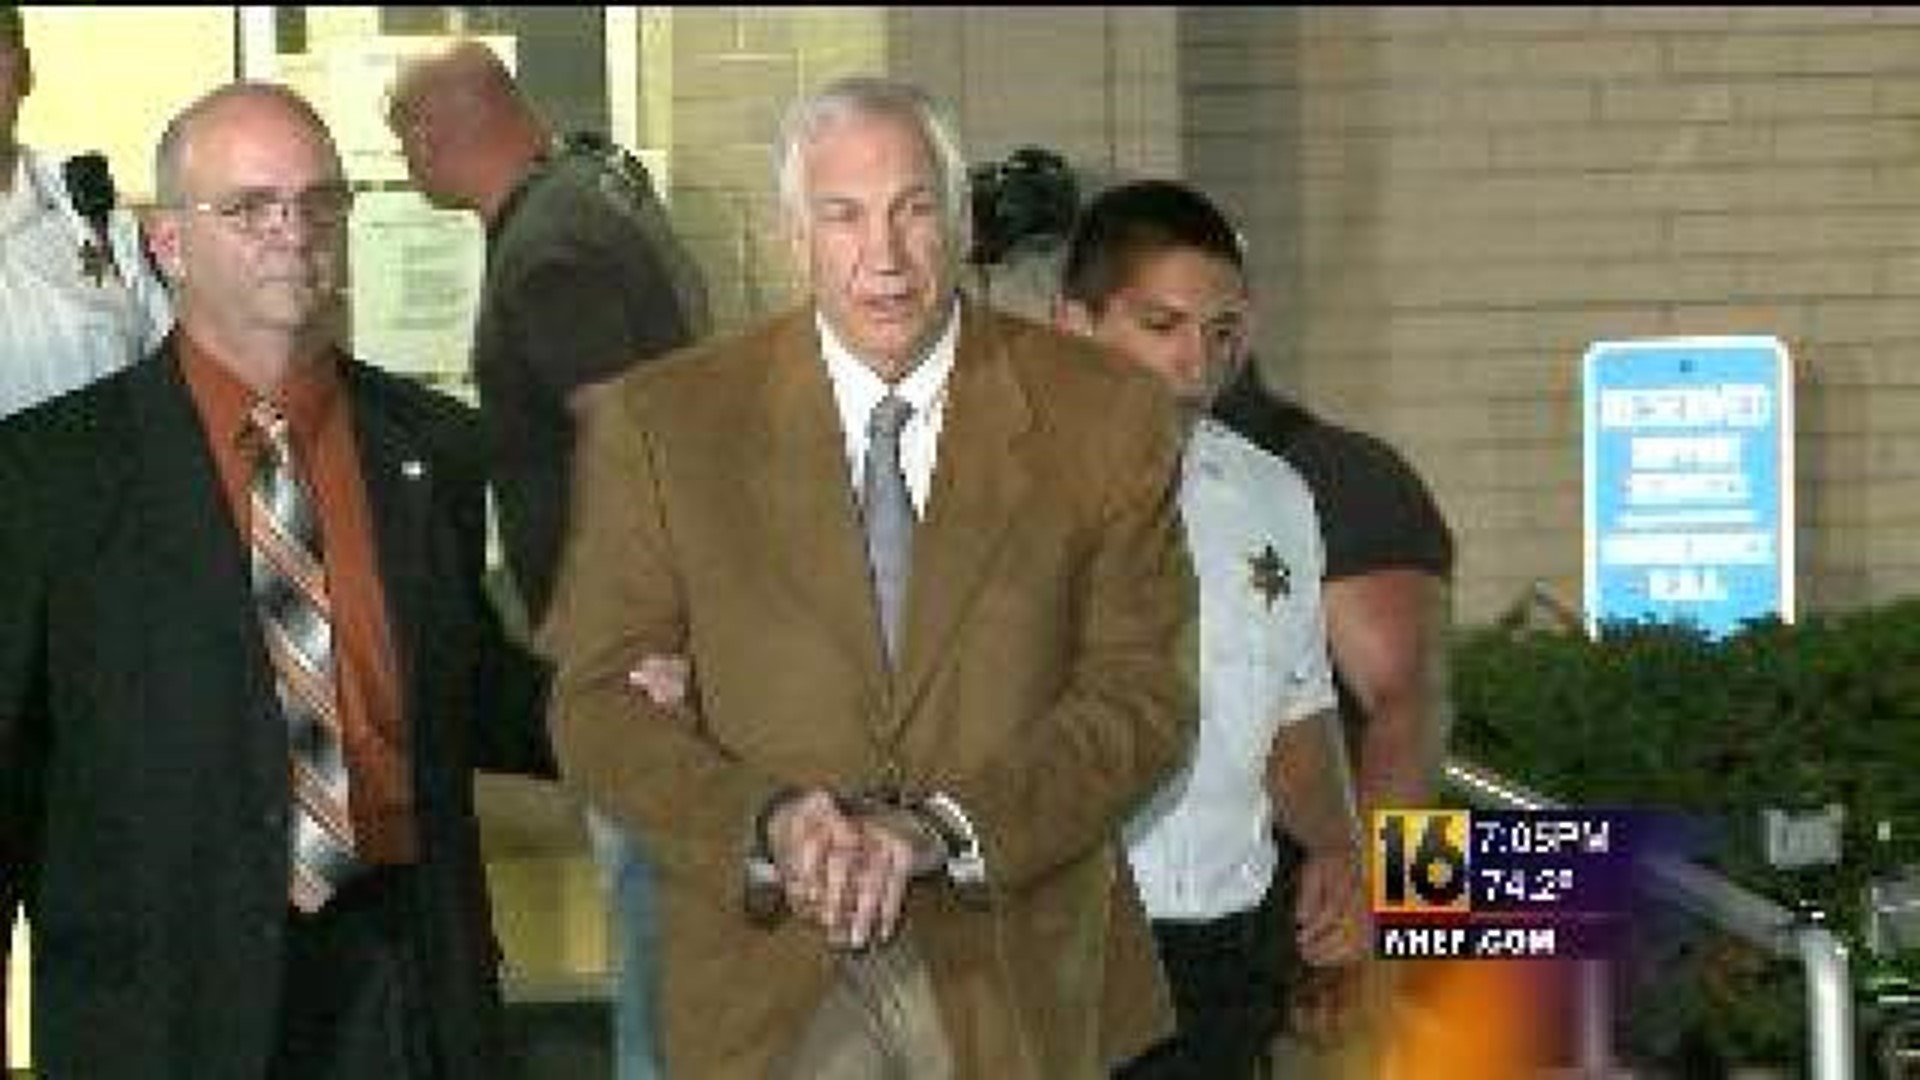 Extra Security, Special Lectures Planned for Sandusky Appeal Hearing